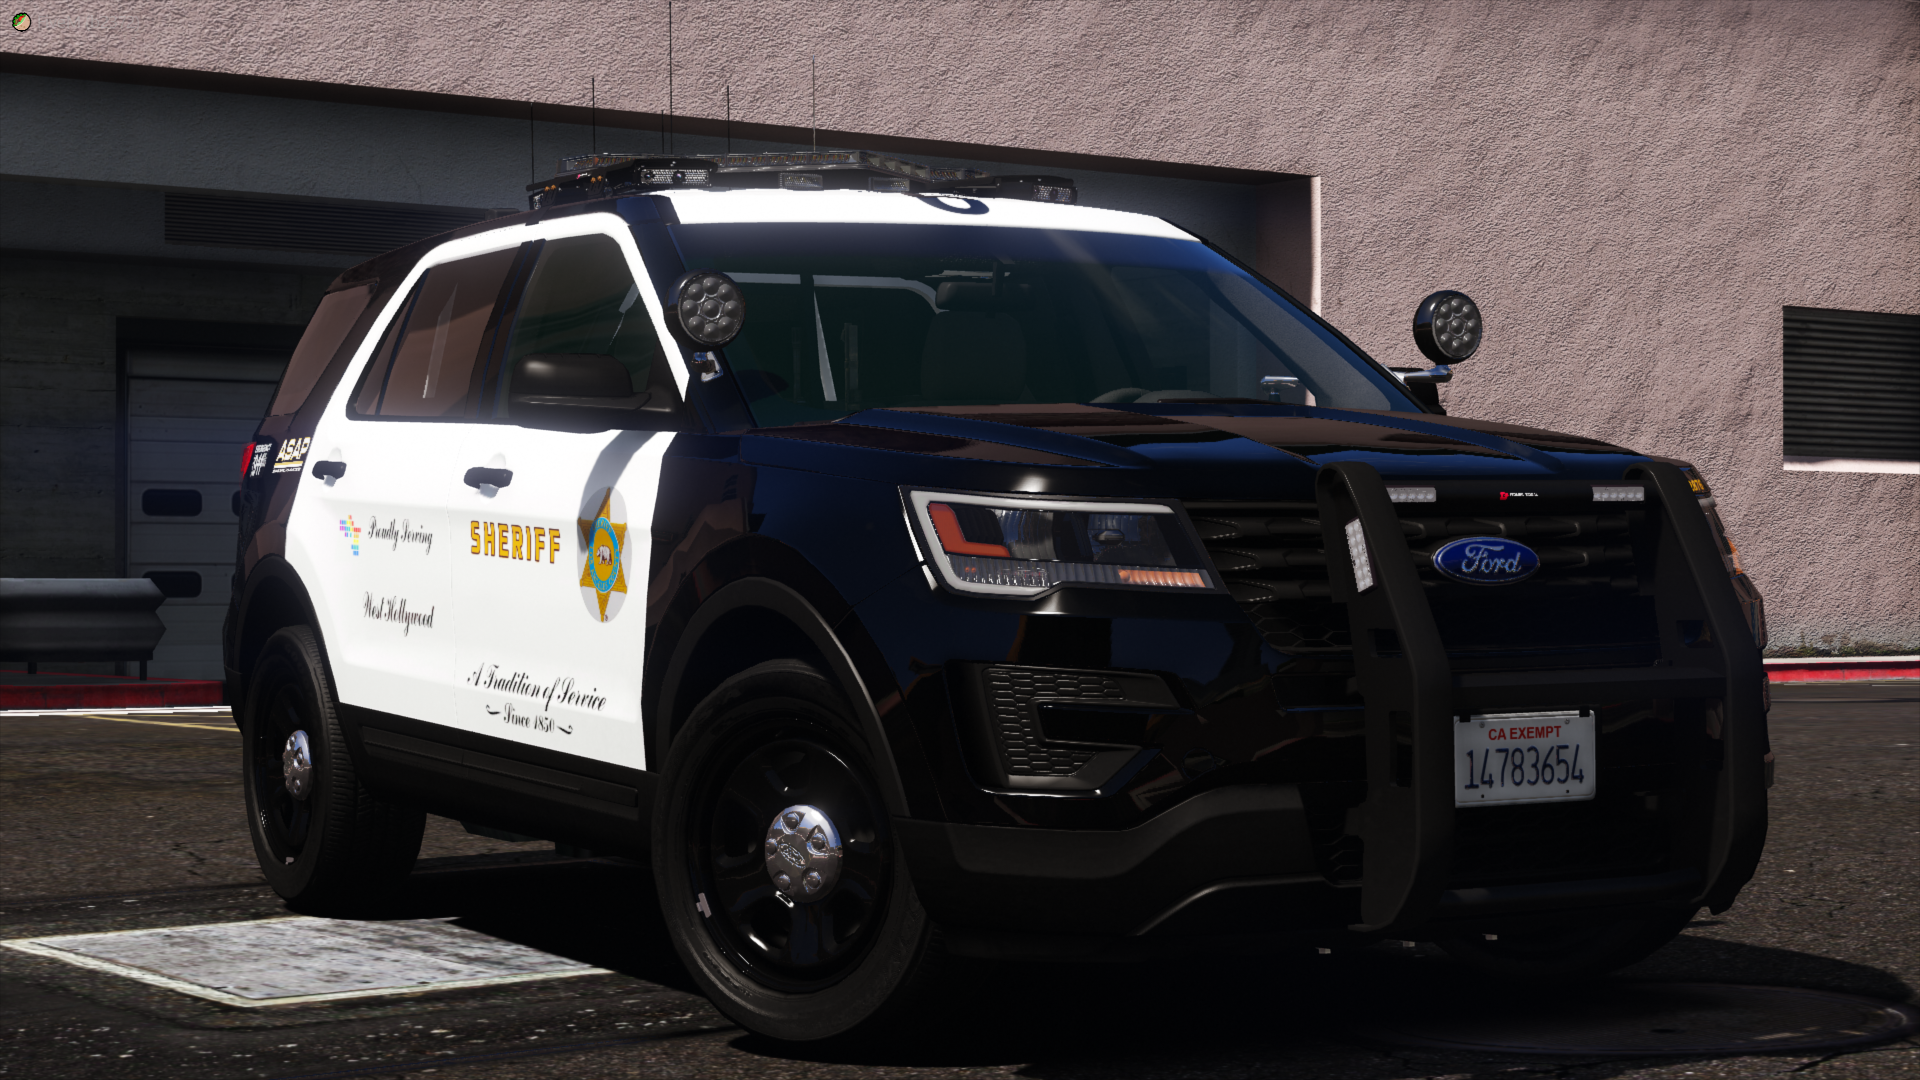 More information about "LASD Pack By Cloverleaf Modifications"